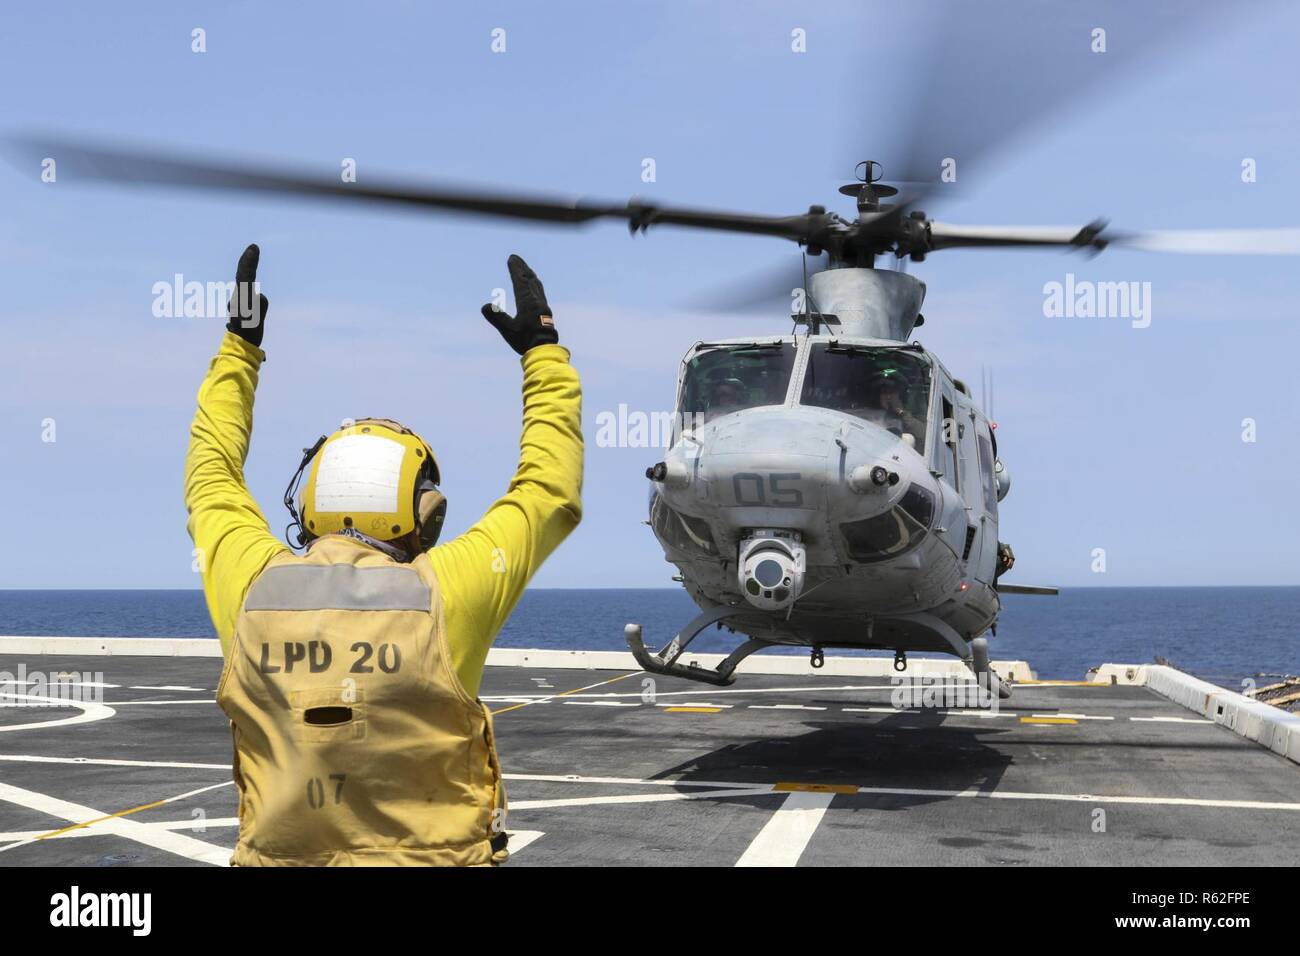 CORAL SEA (Nov. 19, 2018) Aviation Boatswain’s Mate (Handling) 3rd Class Walter Rutherford, from Cheyenne, Wyo., signals a UH-1Y Huey helicopter, assigned to Marine Light Attack Helicopter Squadron (HMLA) 469, as it takes off from the flight deck of the amphibious transport dock ship USS Green Bay (LPD 20) prior to cross deck flight operations with the Royal Australian Navy helicopter landing dock ship HMAS Adelaide (L01). Green Bay, part of Commander Amphibious Squadron 11, is operating in the region to enhance interoperability with partners and serve as a ready-response force for any type of Stock Photo